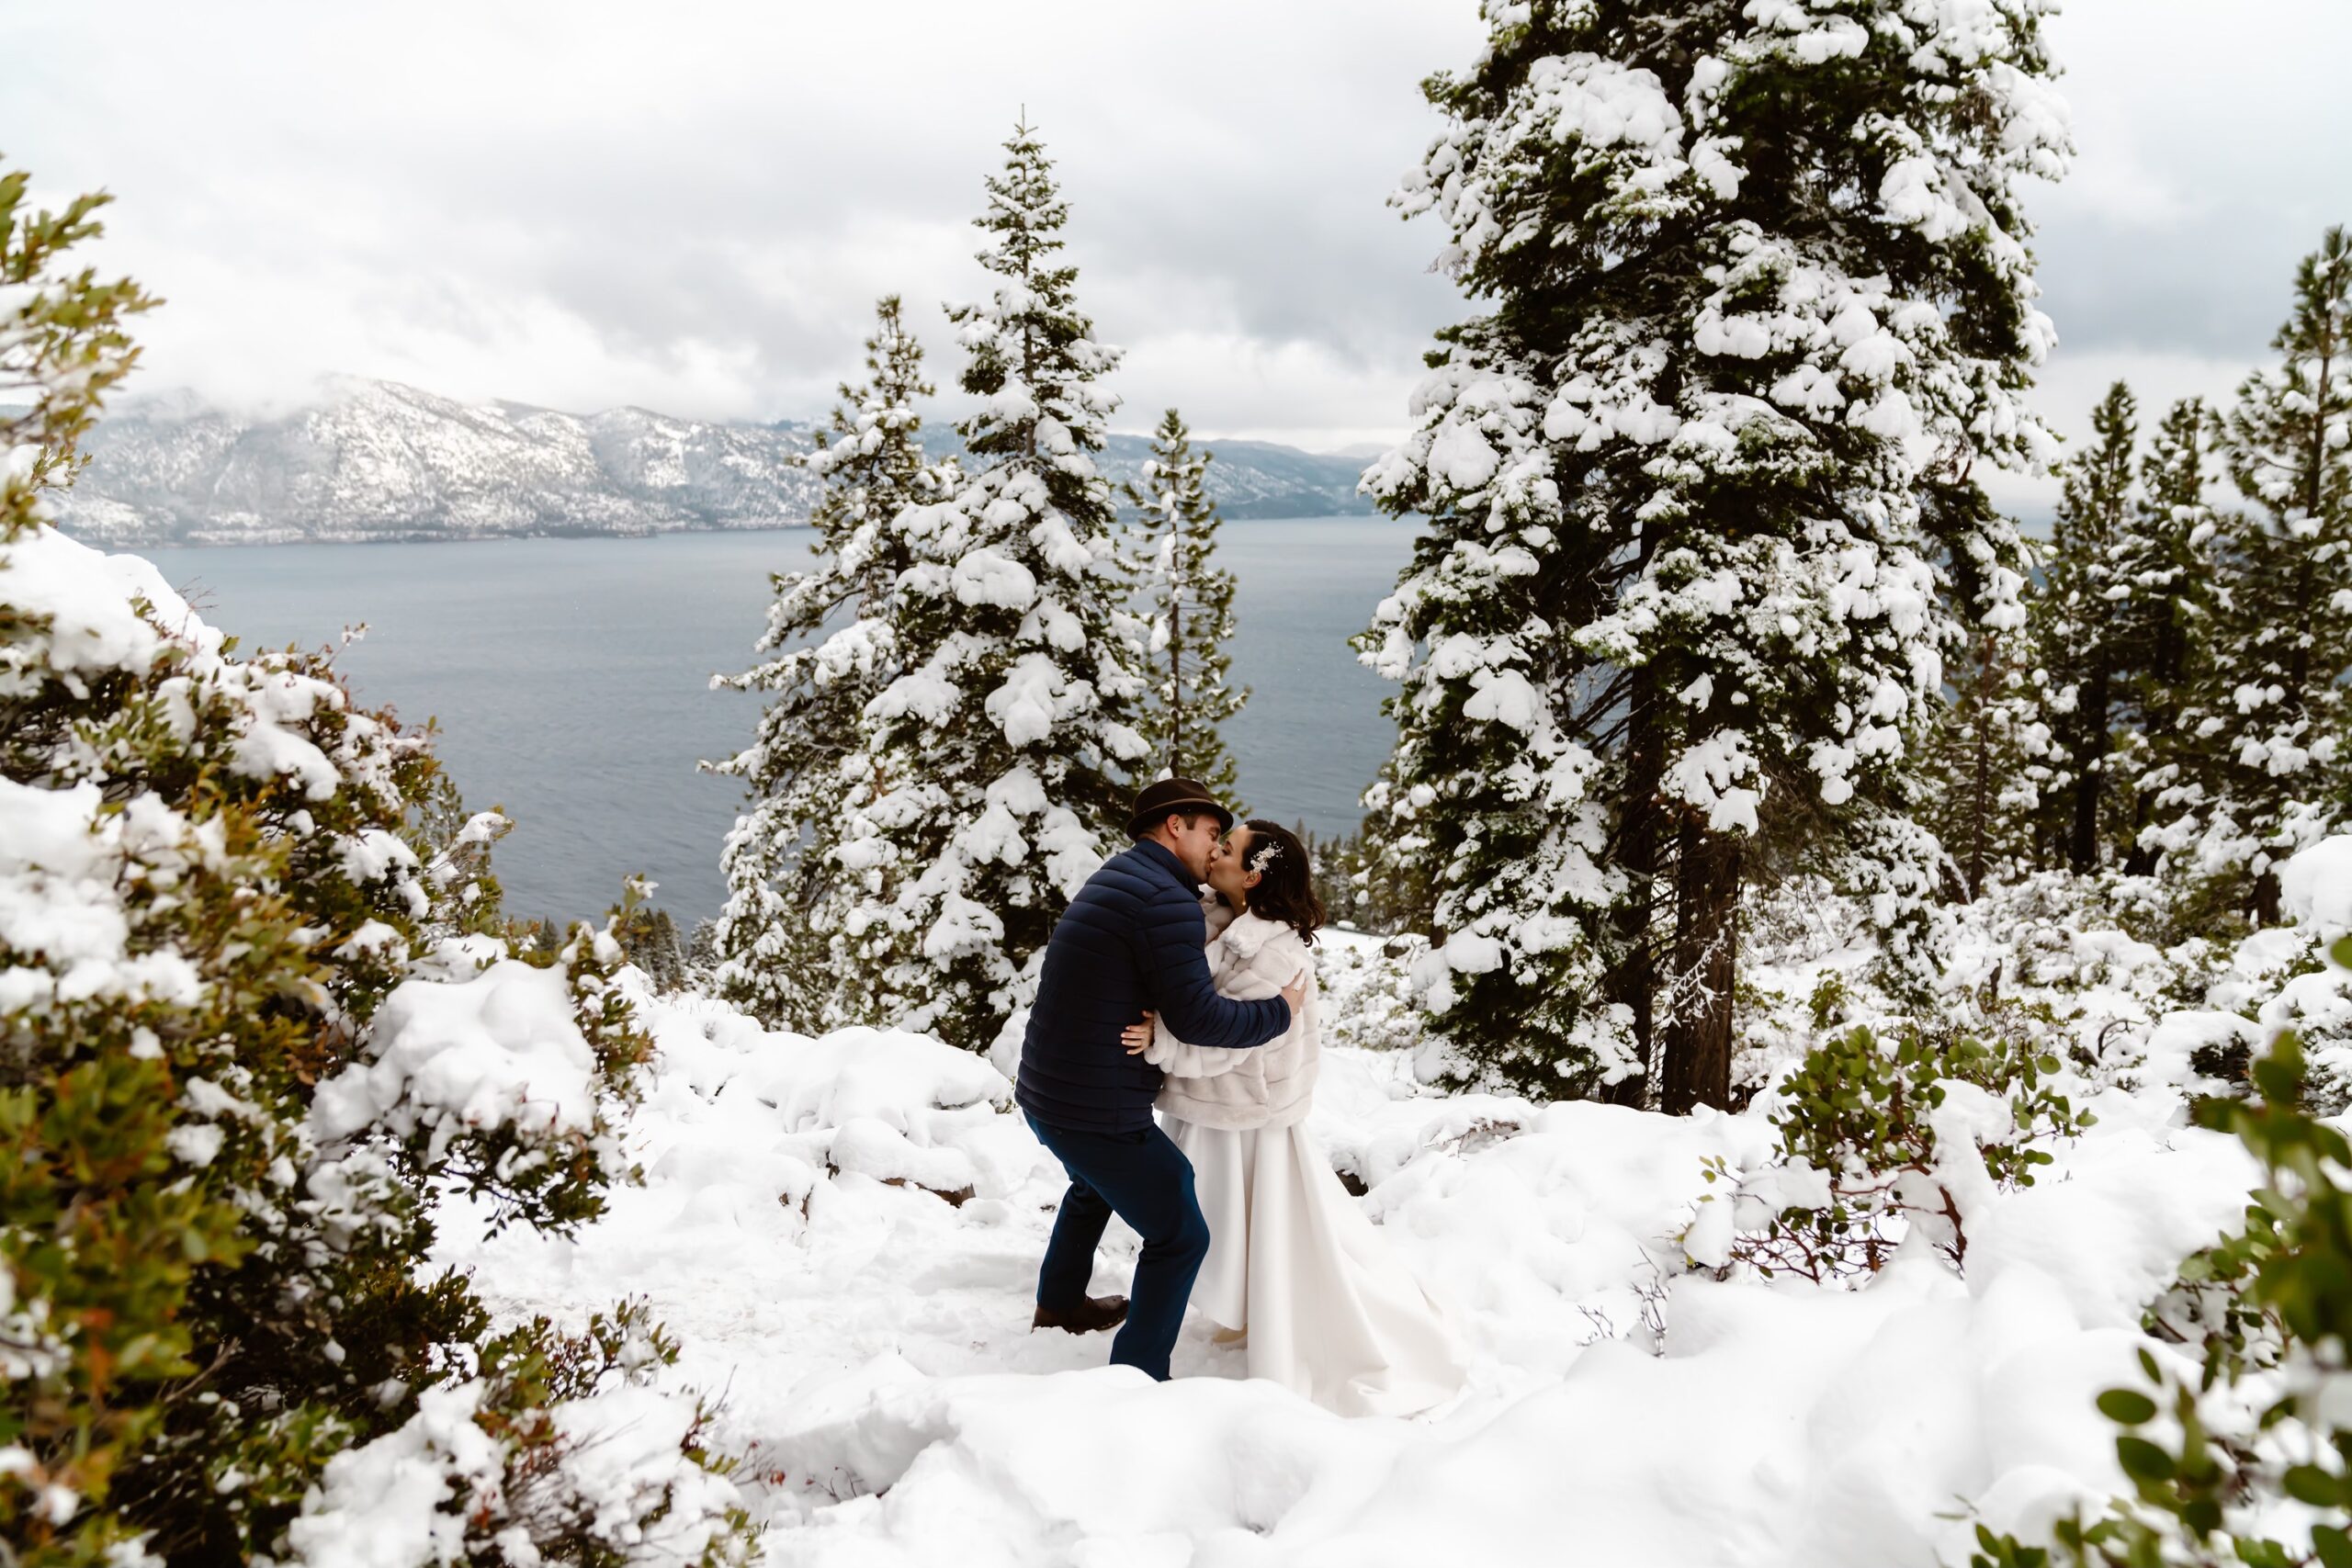 Bride and groom kiss at snowy mountain elopement